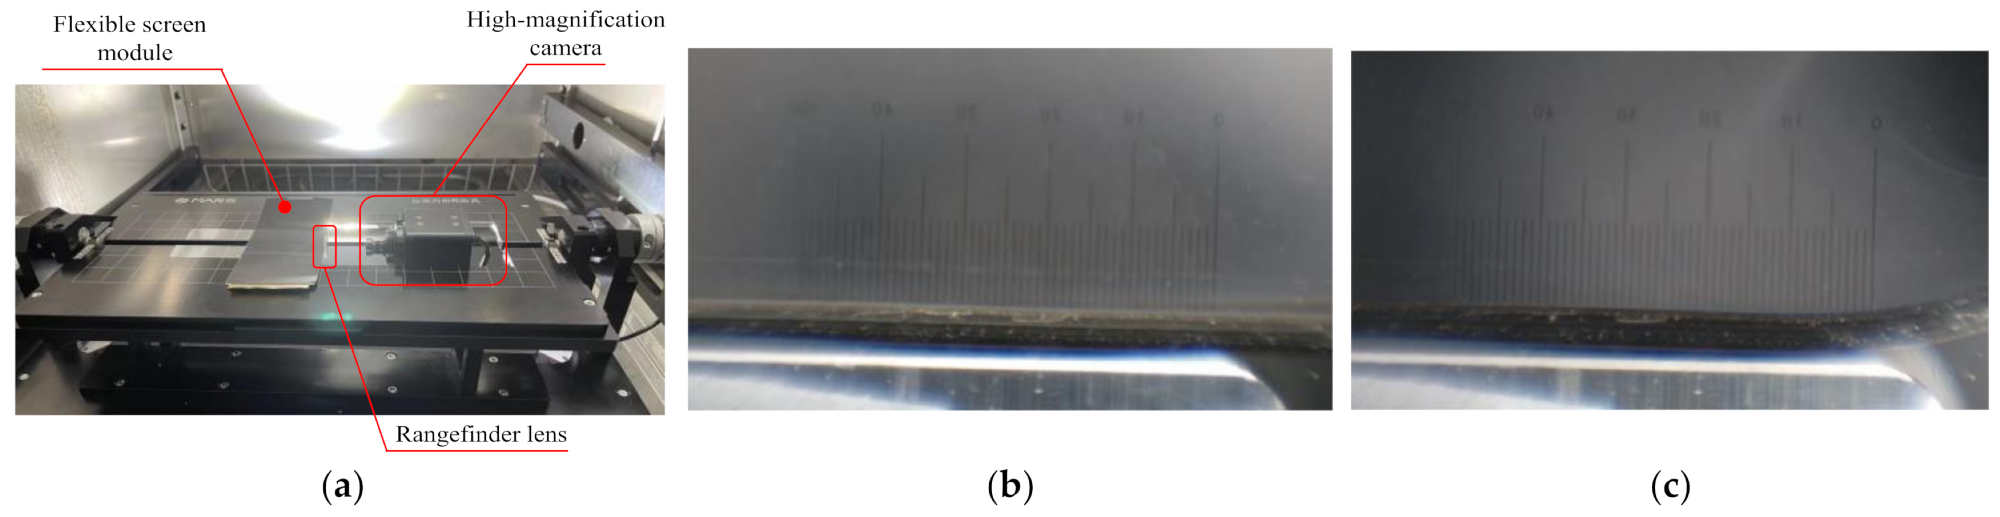 (a) Experimental schematic;  (b) ranging before bending (units shown in µm);  (c) ranging after bending (units shown in µm).